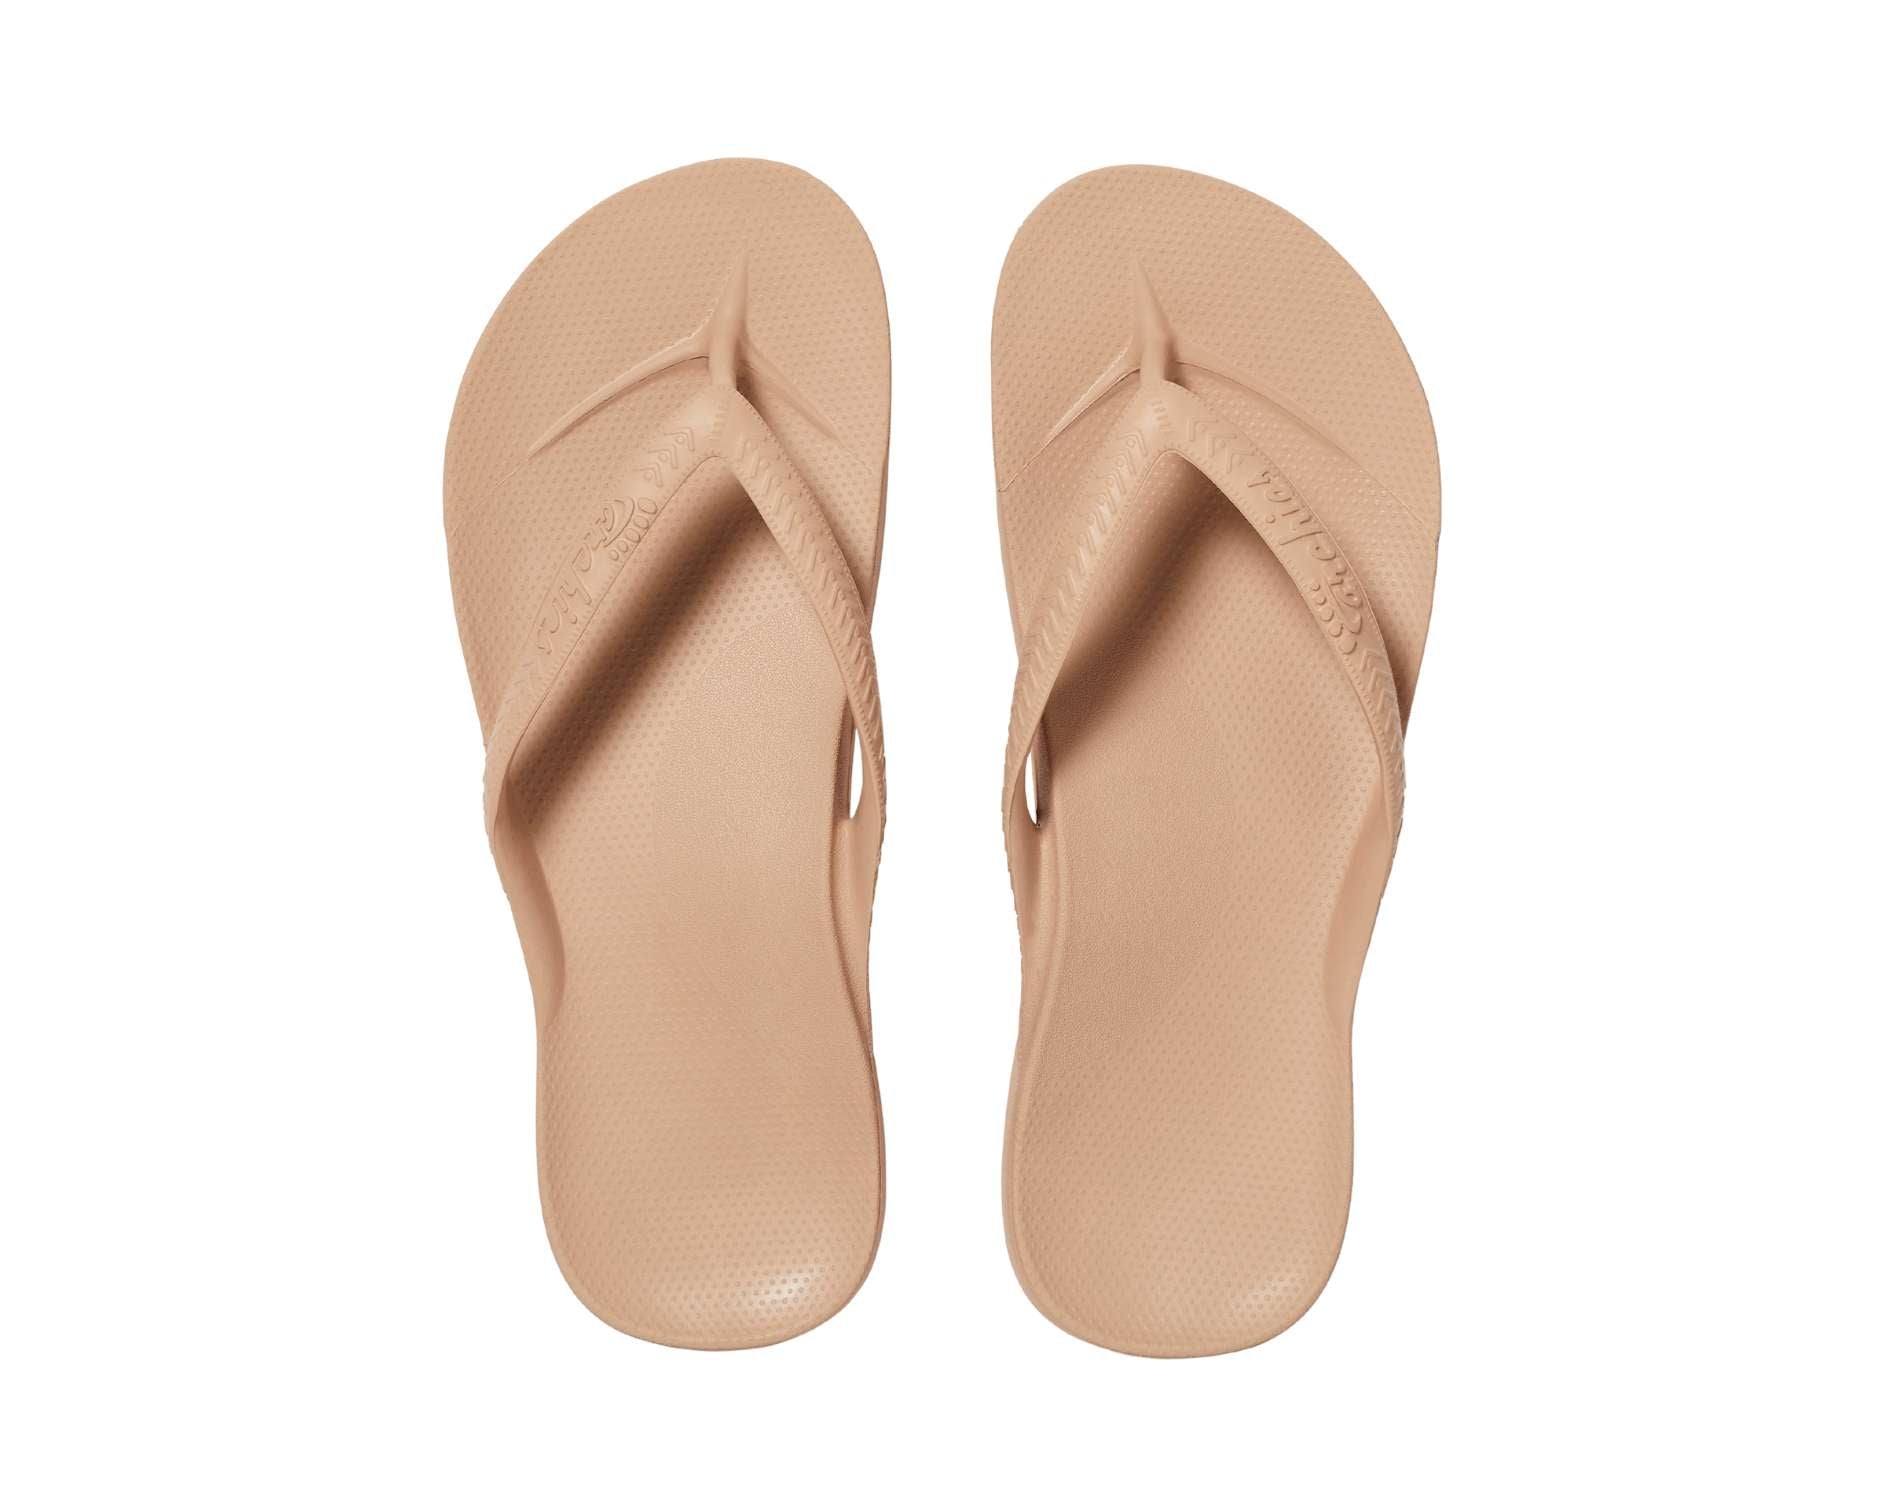 Archies arch support thongs in tan colour